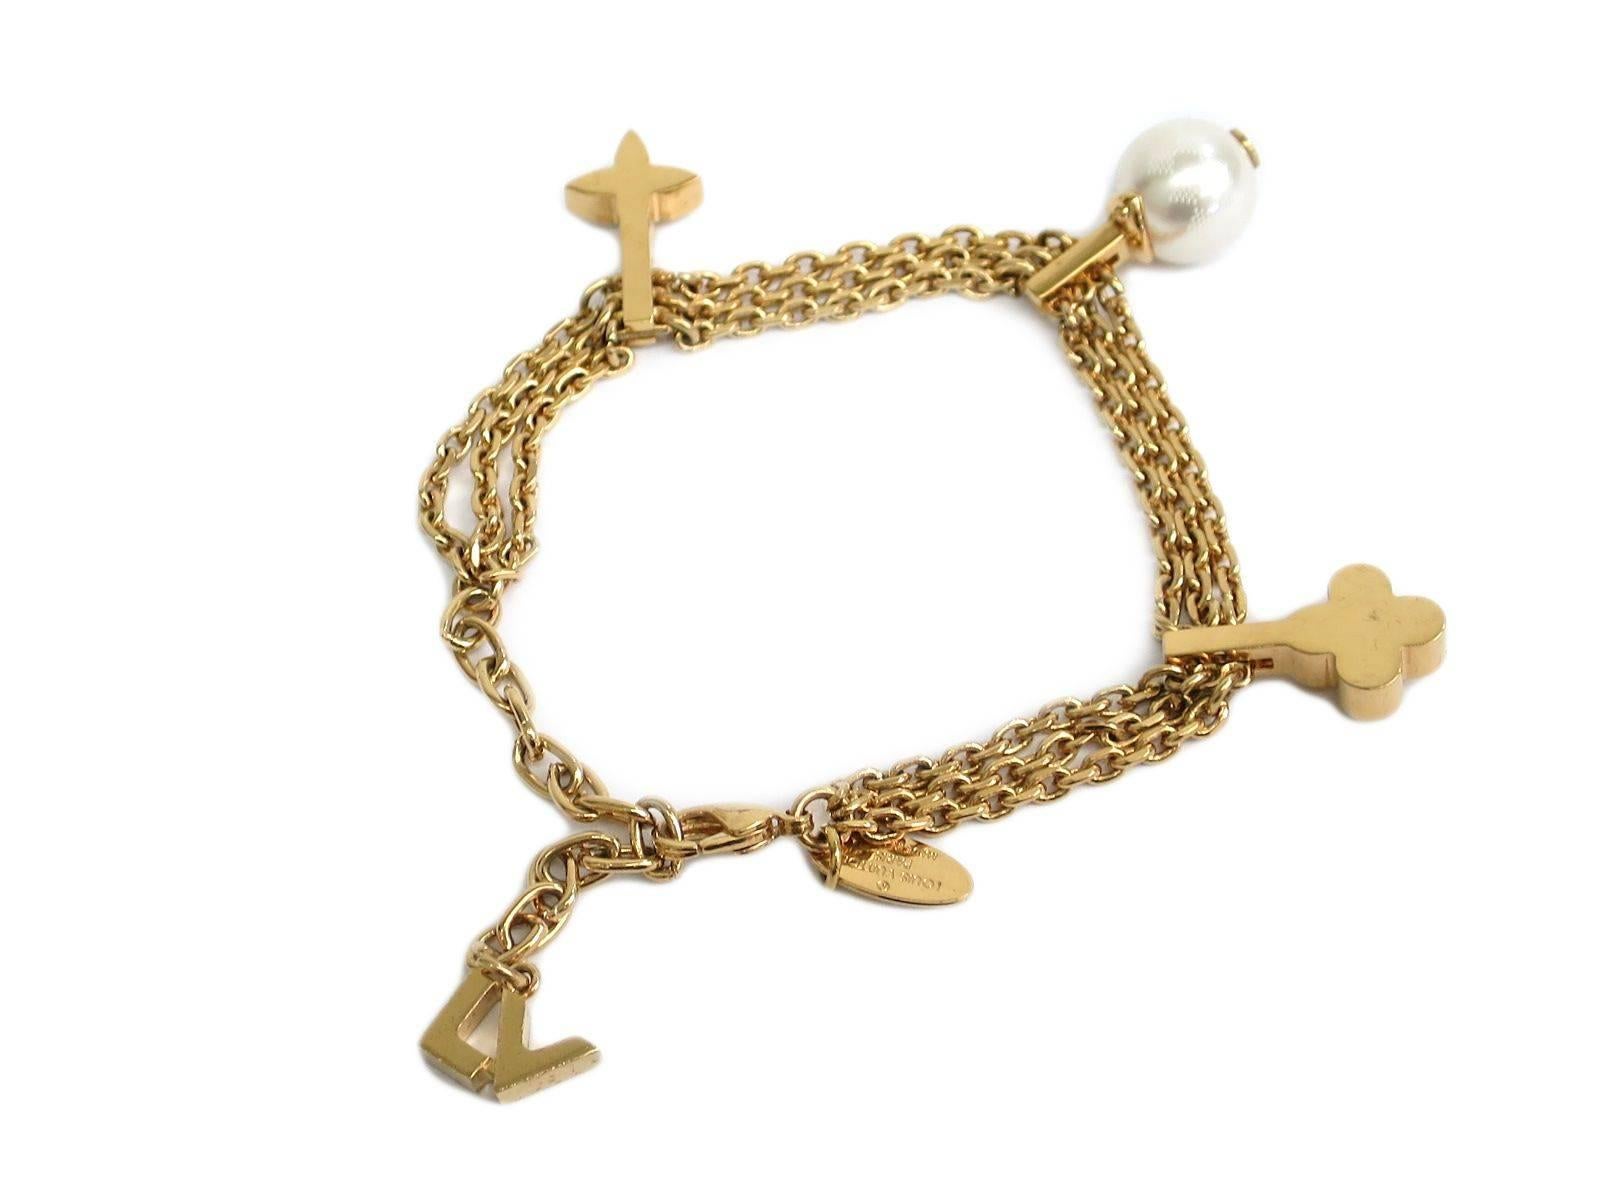 CURATOR'S NOTES

Metal
Gold tone
Faux pearl
Lobster claw closure
Made in Italy
Date code OB0164
Adjustable circumference ~6.3-8.7